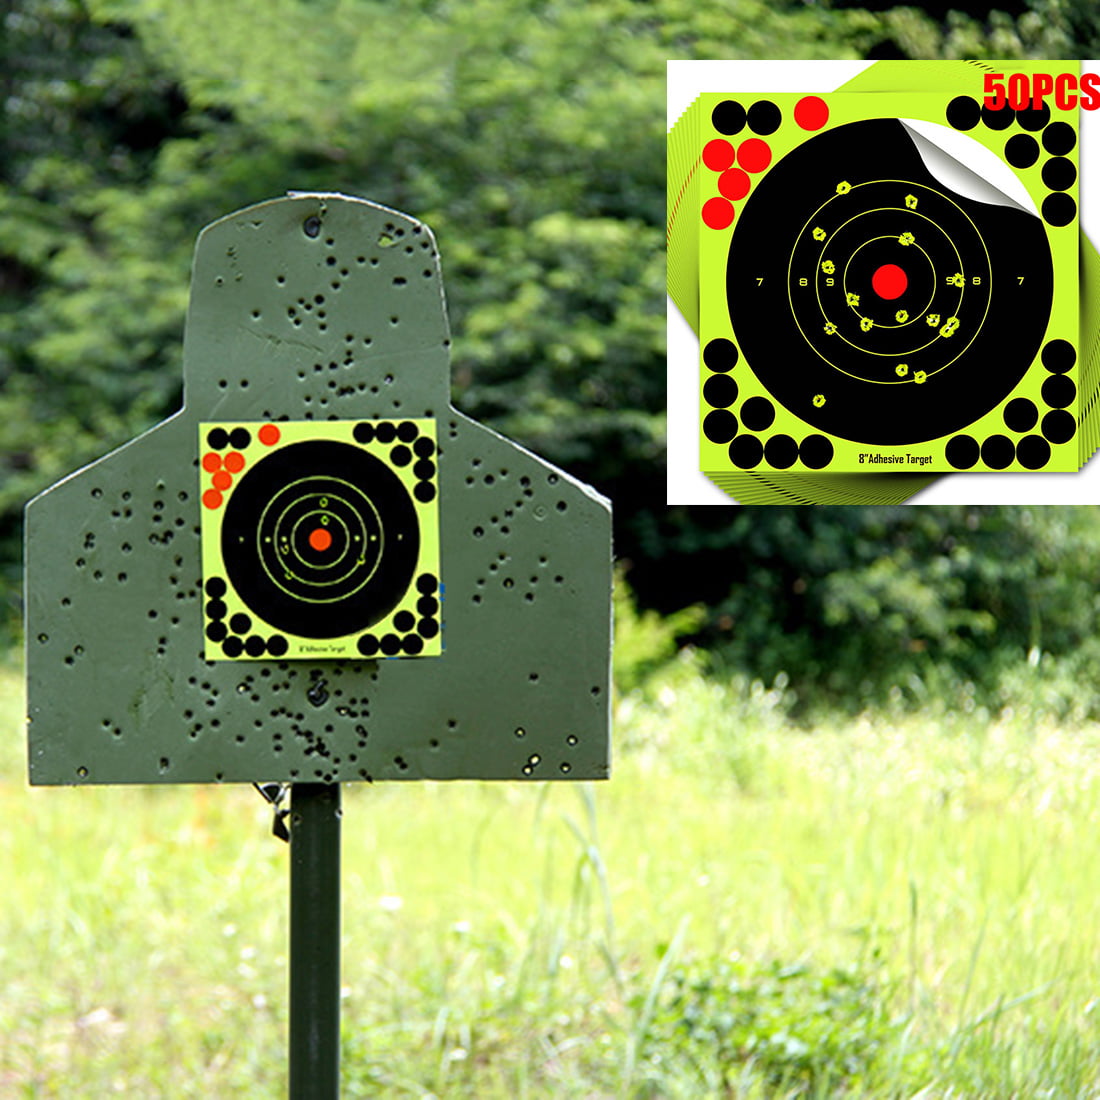 50pcs 12inch Striking Round Paper Splatter Targets Stickers For Shooting Archery 